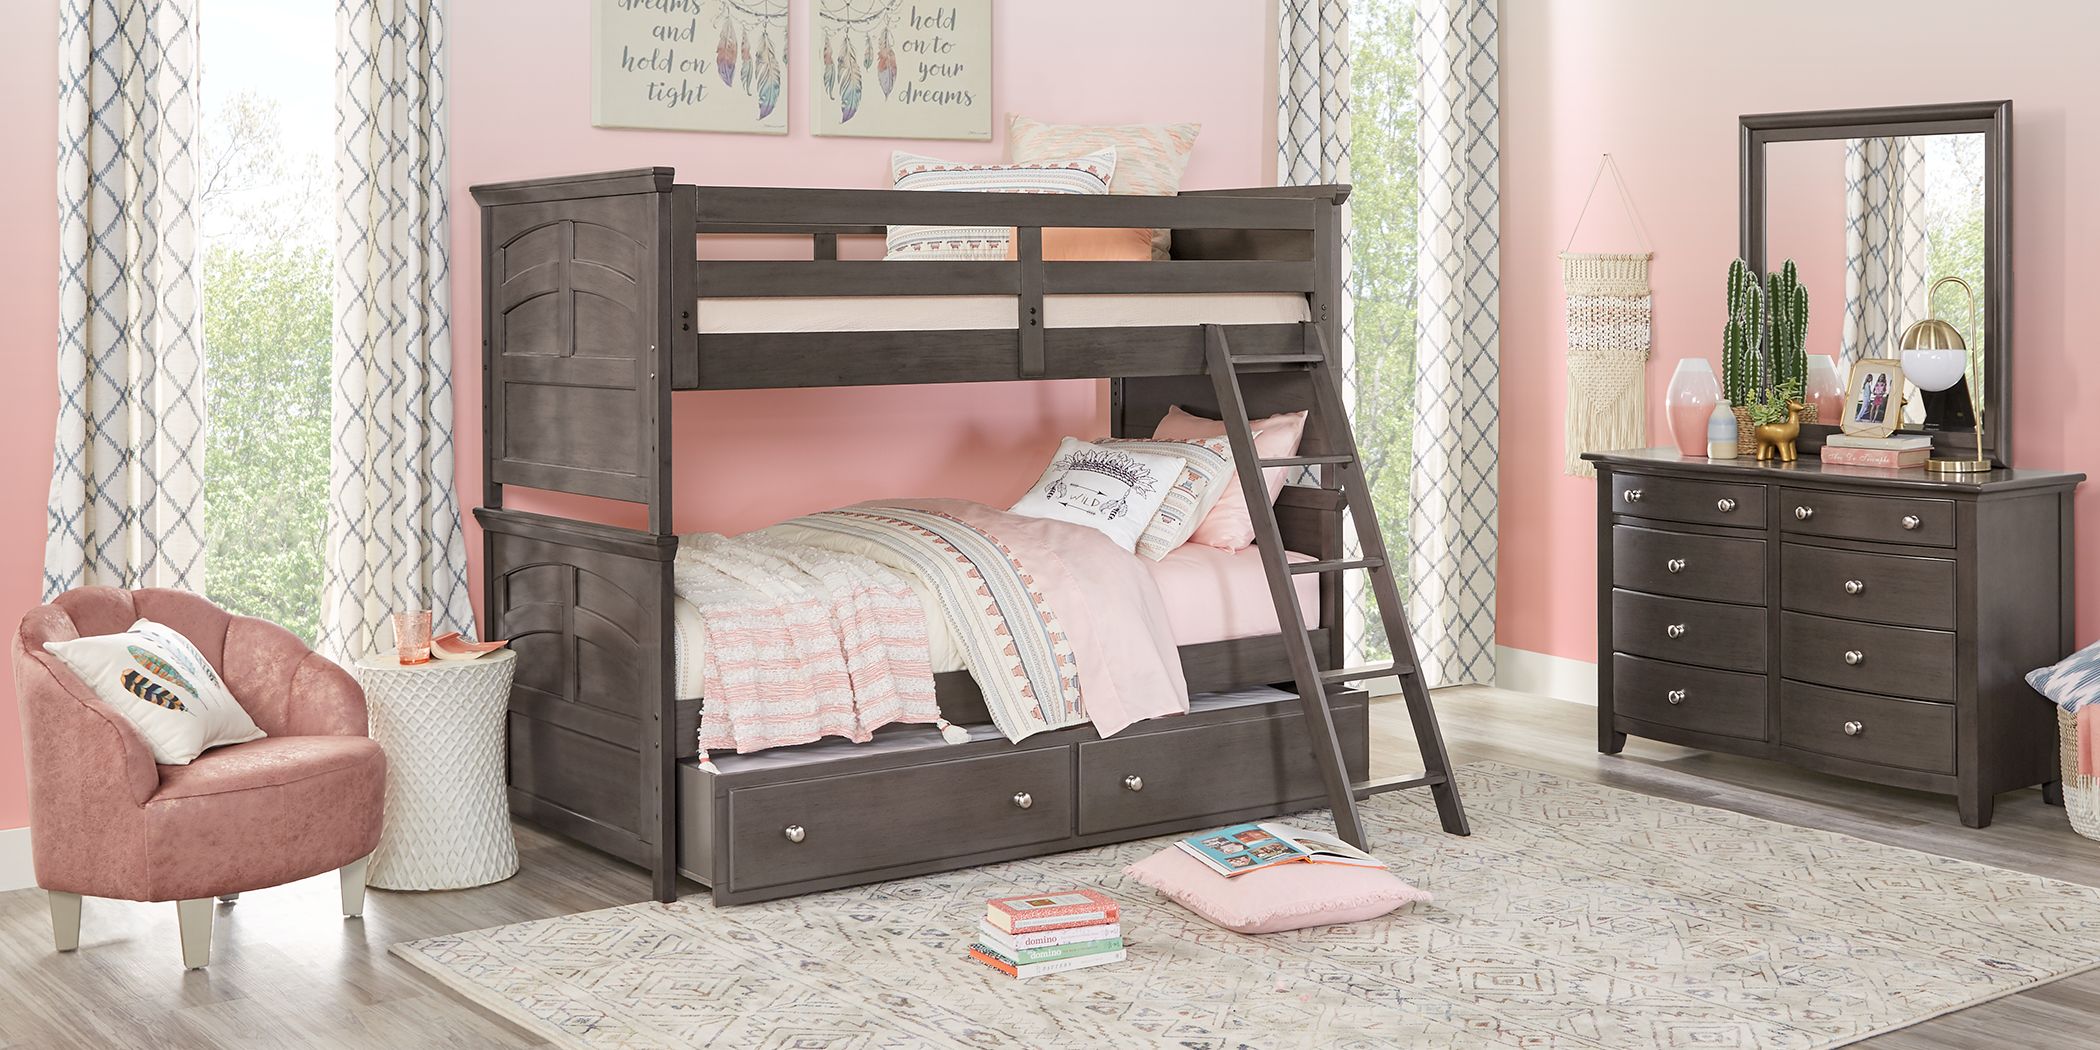 double bed frame for teenager